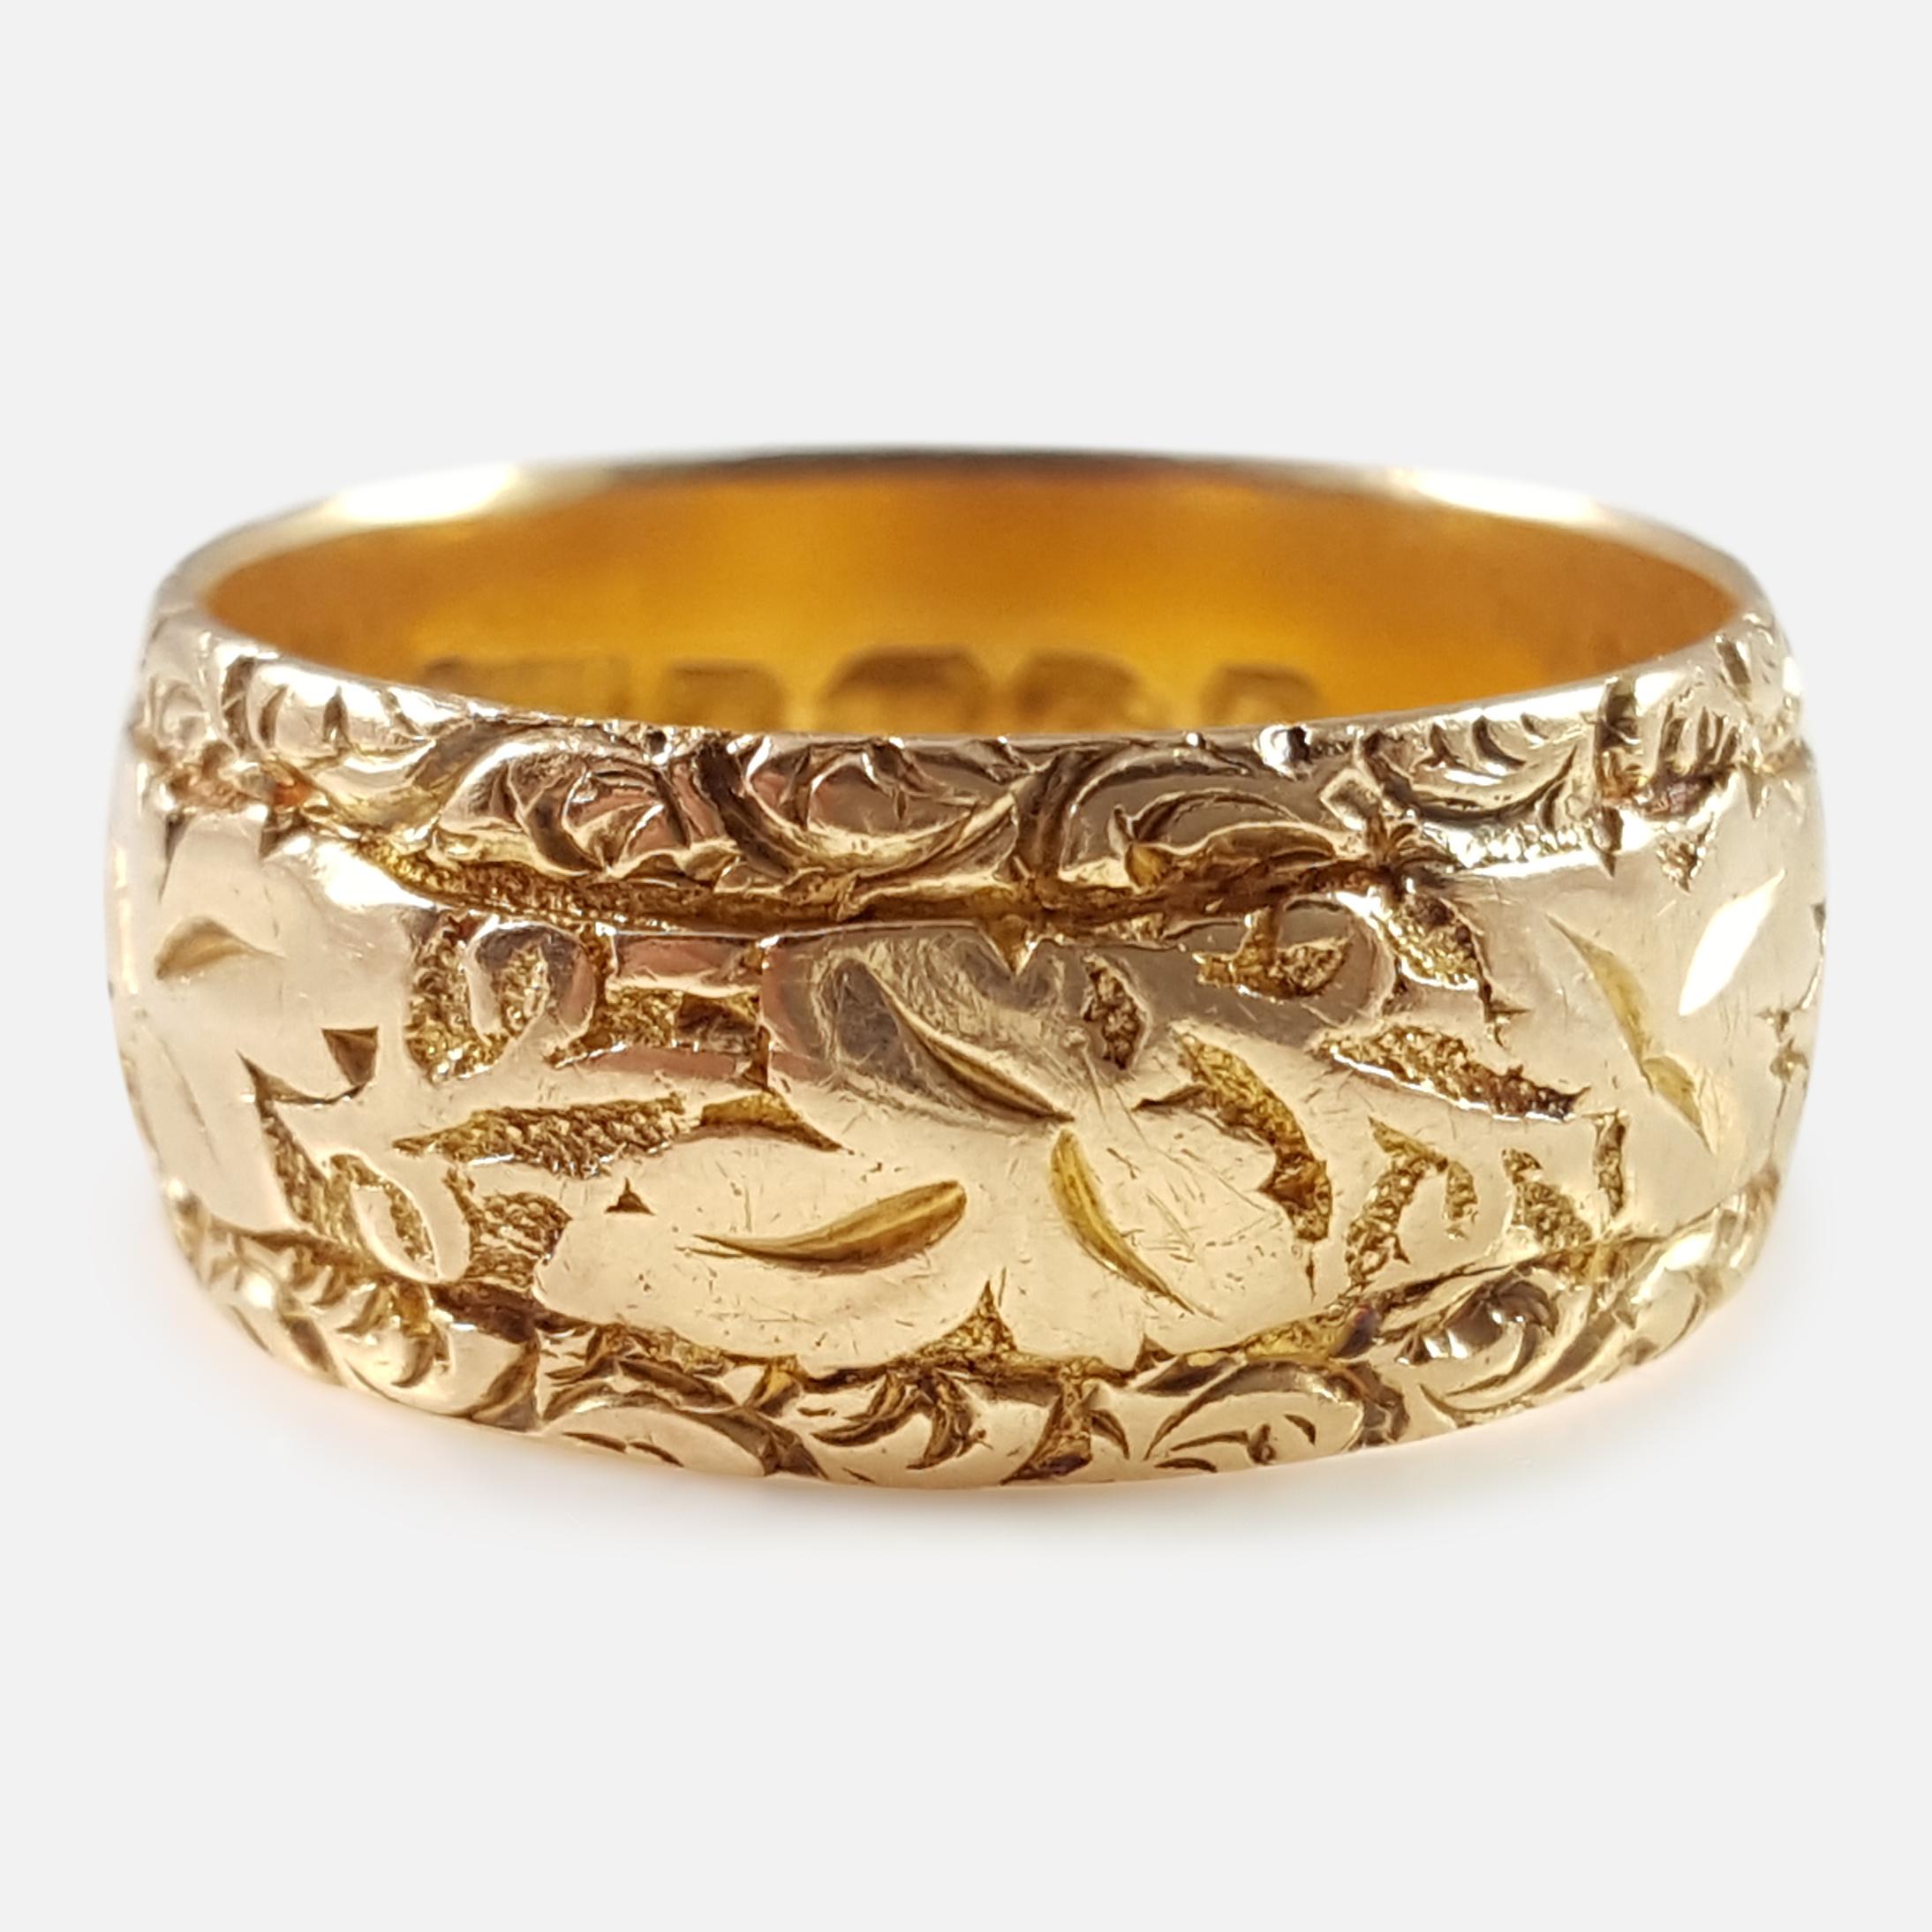 Description: - A superb antique Edwardian 18 karat yellow gold floral engraved wedding band ring. The ring is UK hallmarked with the Birmingham Assay office stamp, '18' to denote 18 karat (carat) gold, and date letter 'e' for (1904).

Assay: - .750